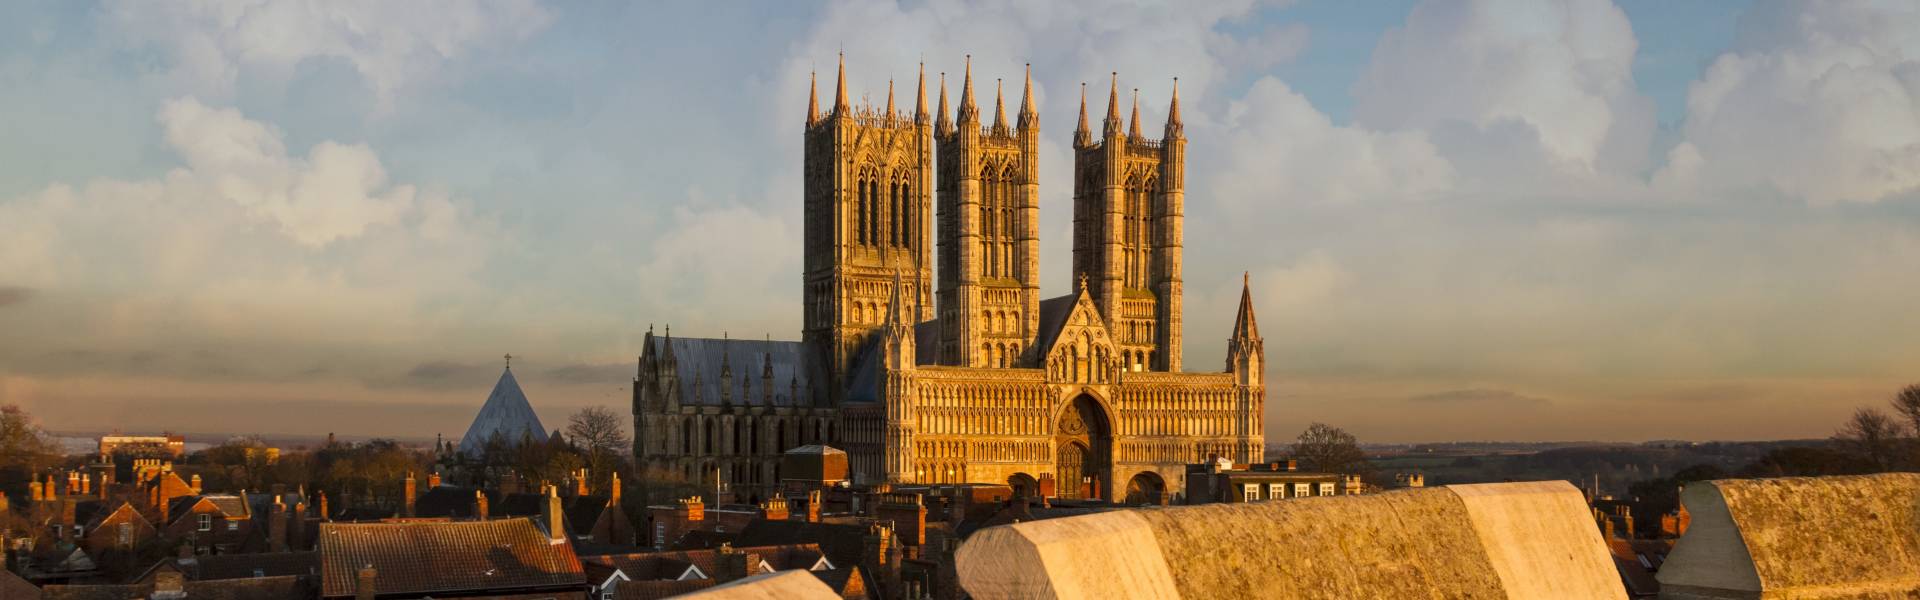  A view of Lincoln Cathedral at dusk from the Castle.